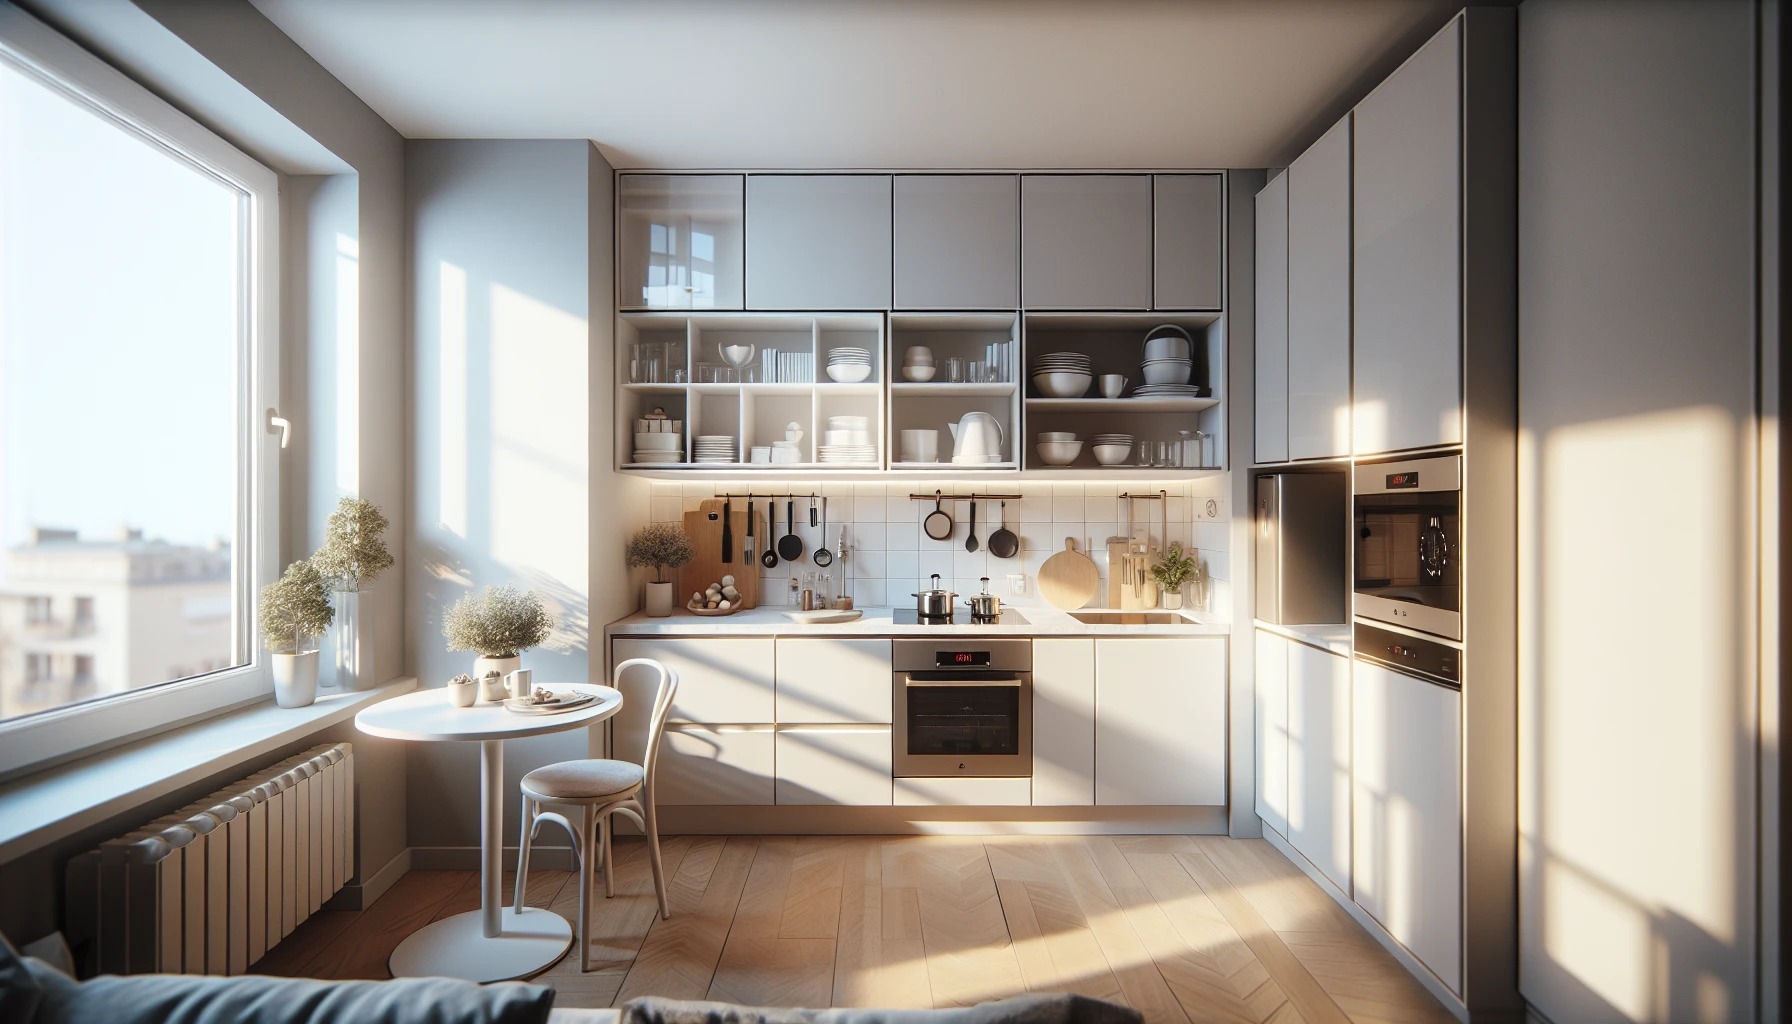 Efficient layout of a compact apartment kitchen